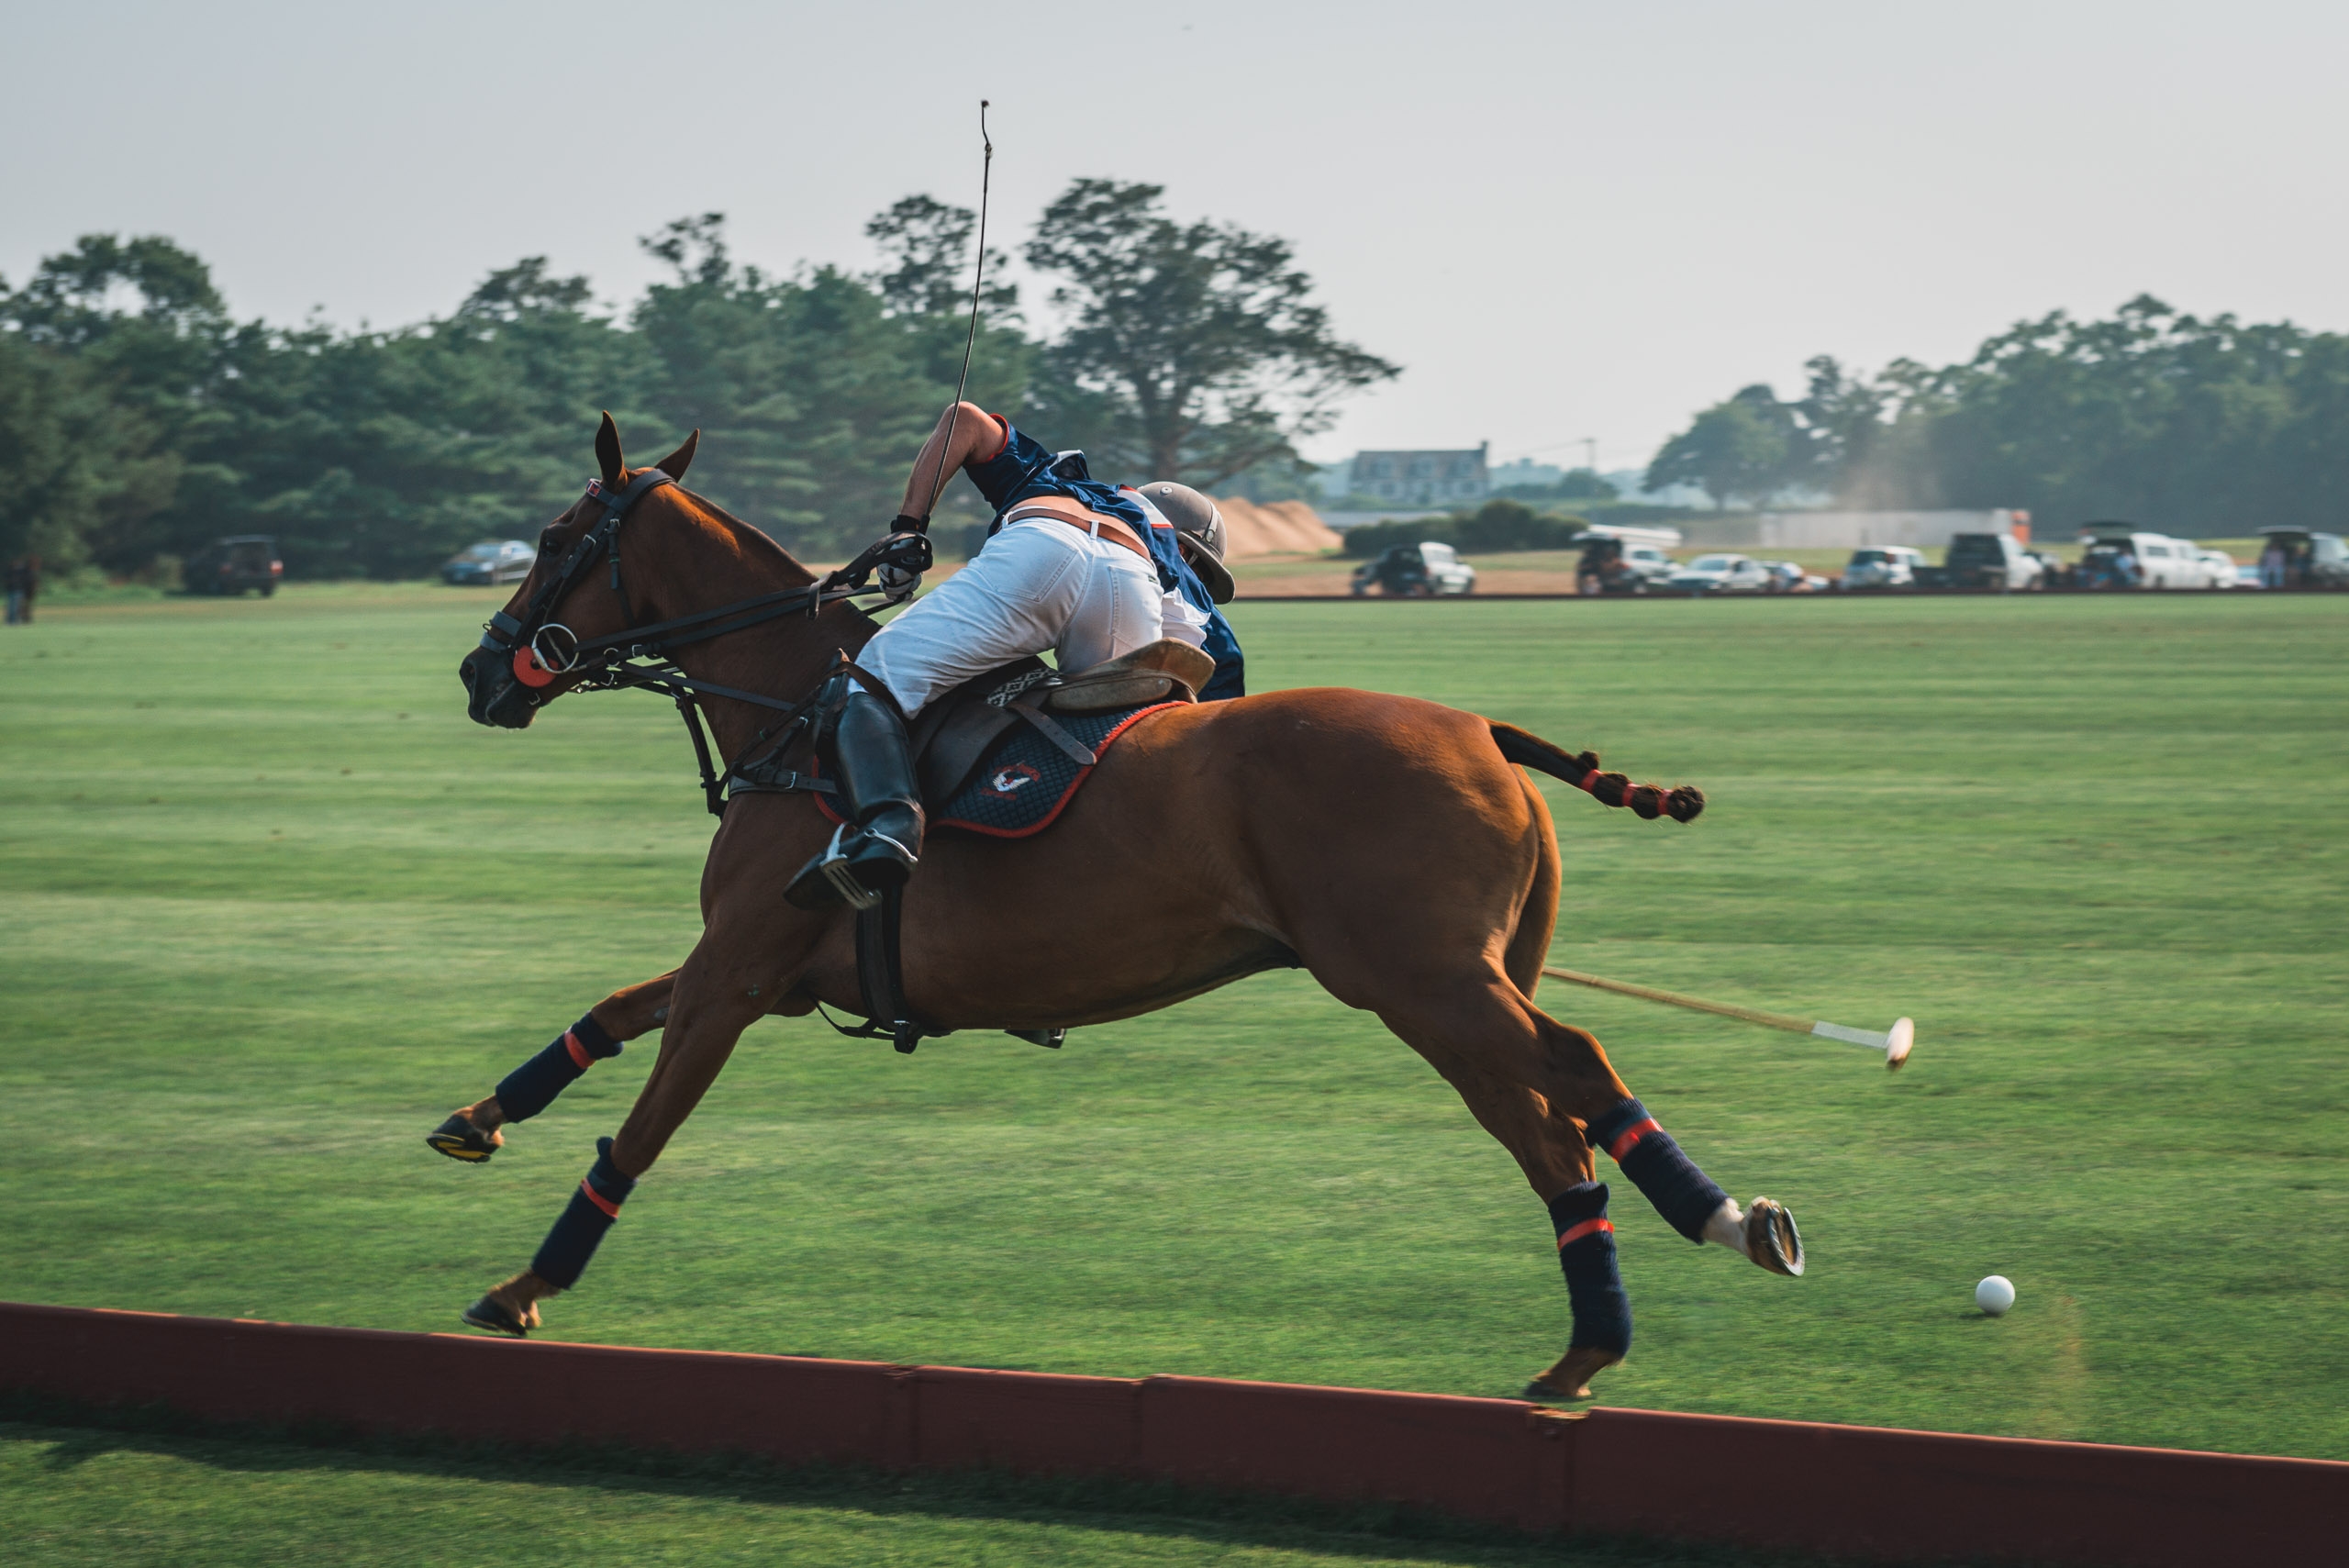 Polo at Full Speed - Part II